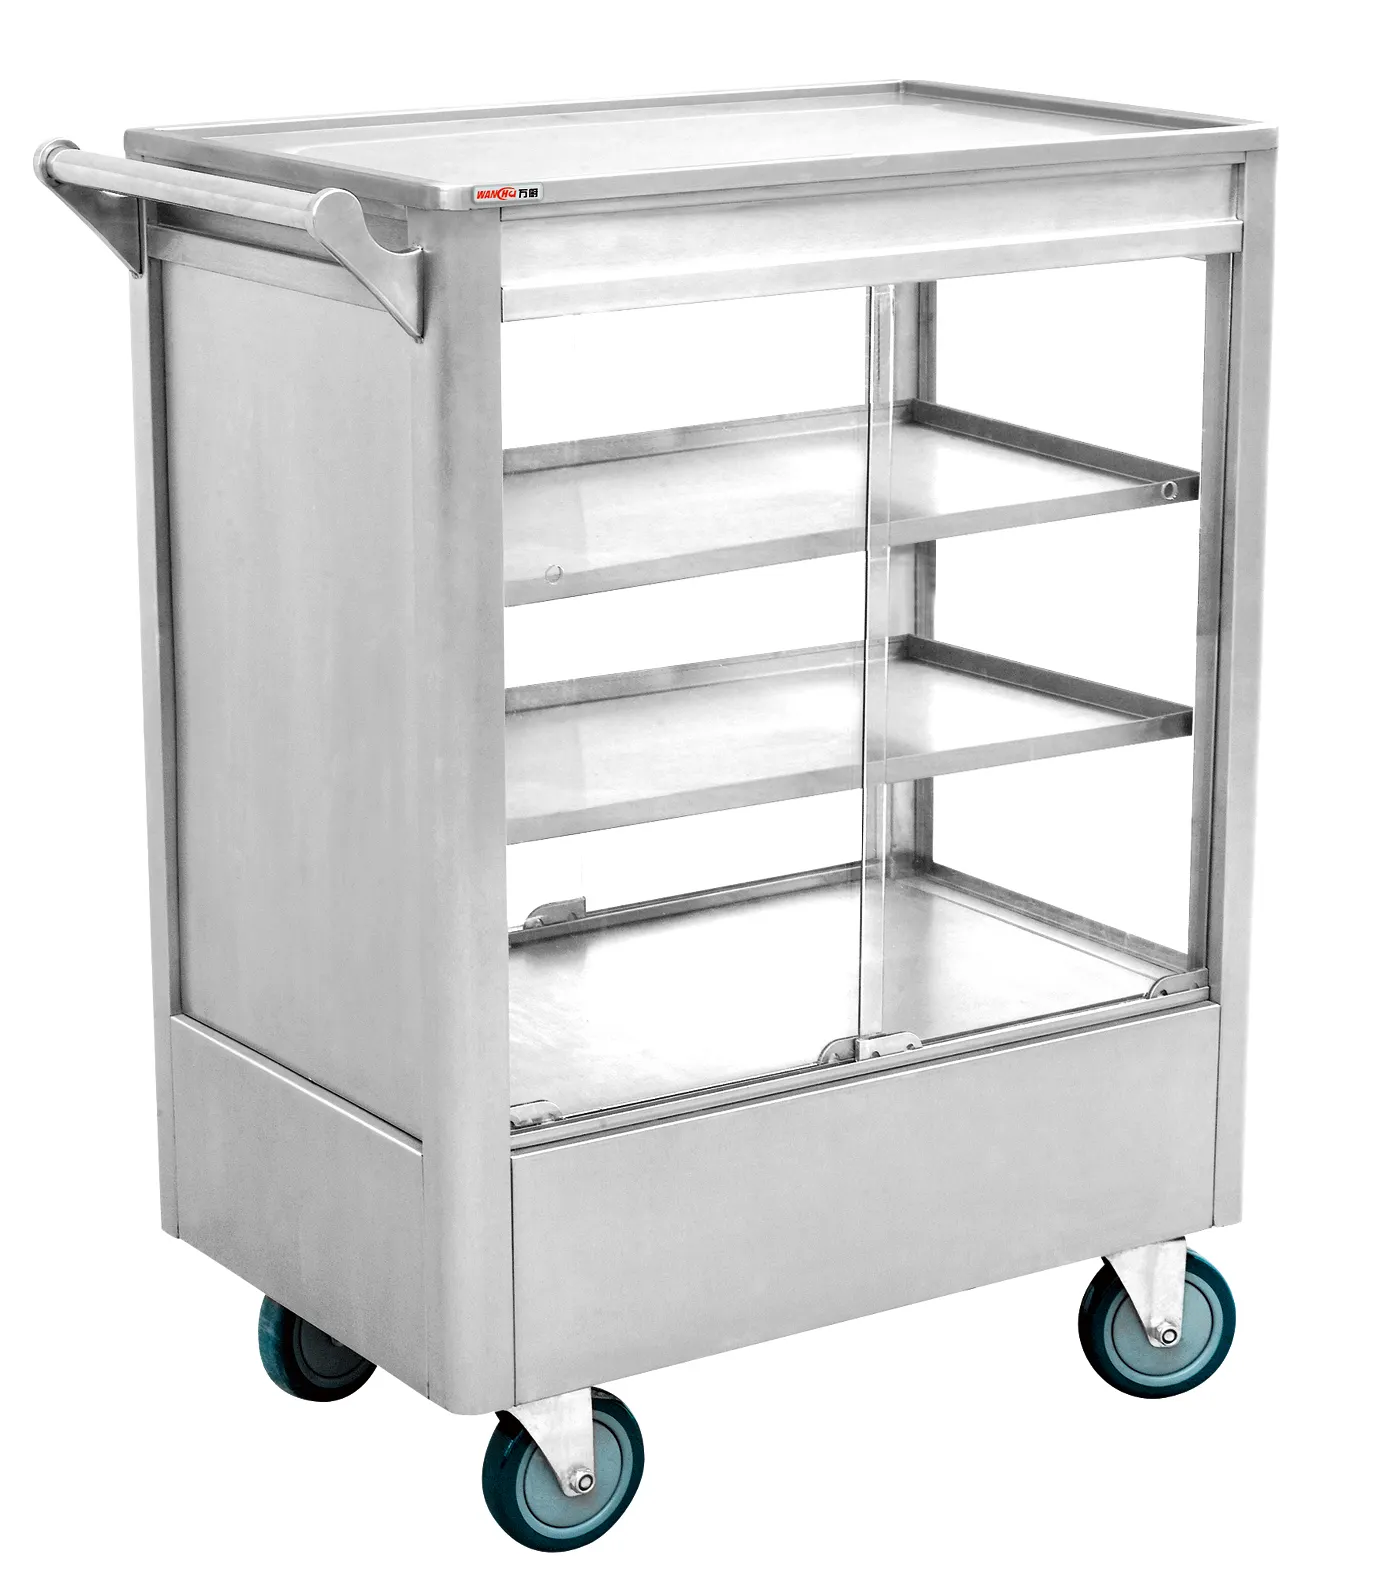 Electric Hotel Restaurant Dessert Food Display Warmer Cart 4 Tiers Stainless Steel Commercial Cake Heated Cart Trolley Factory